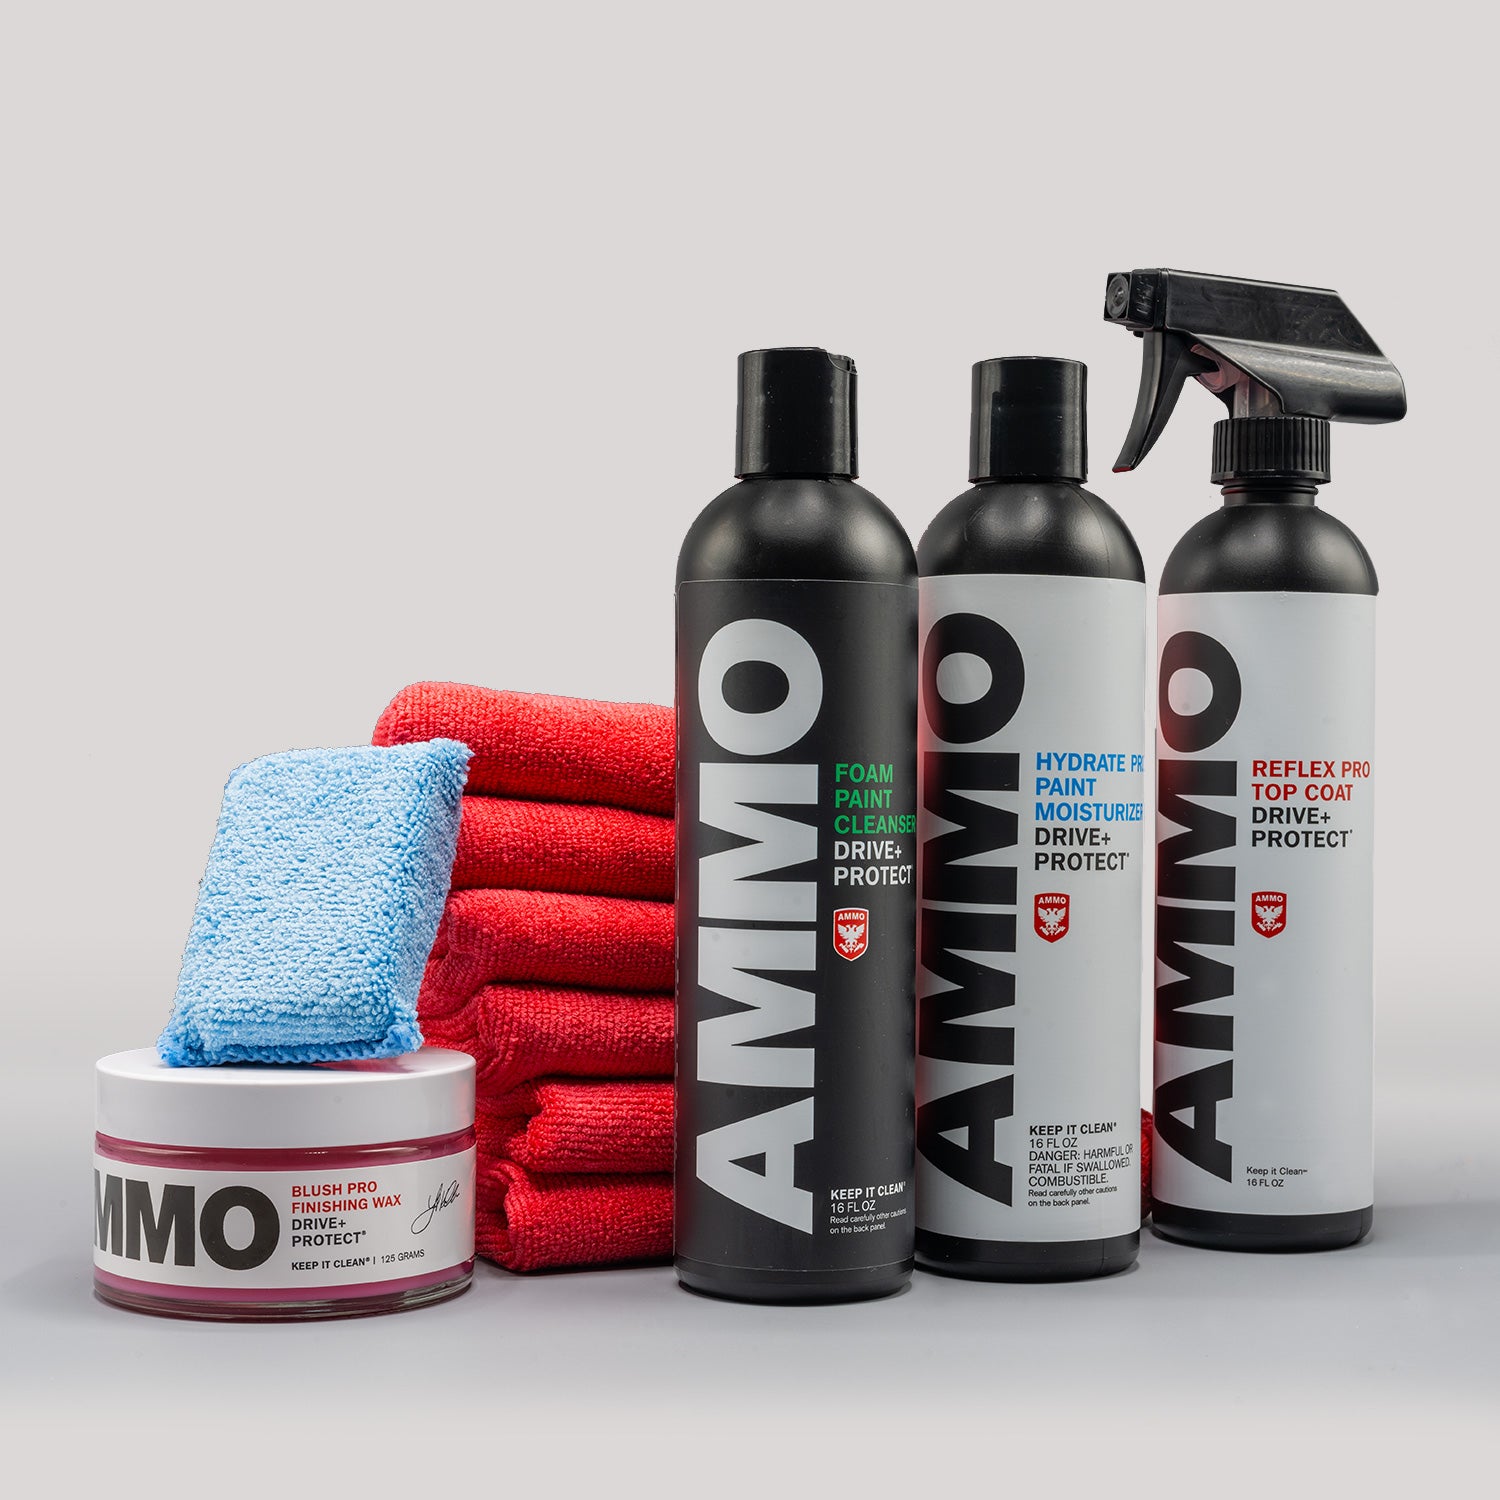 Cover All Professional Car Detailing Kit